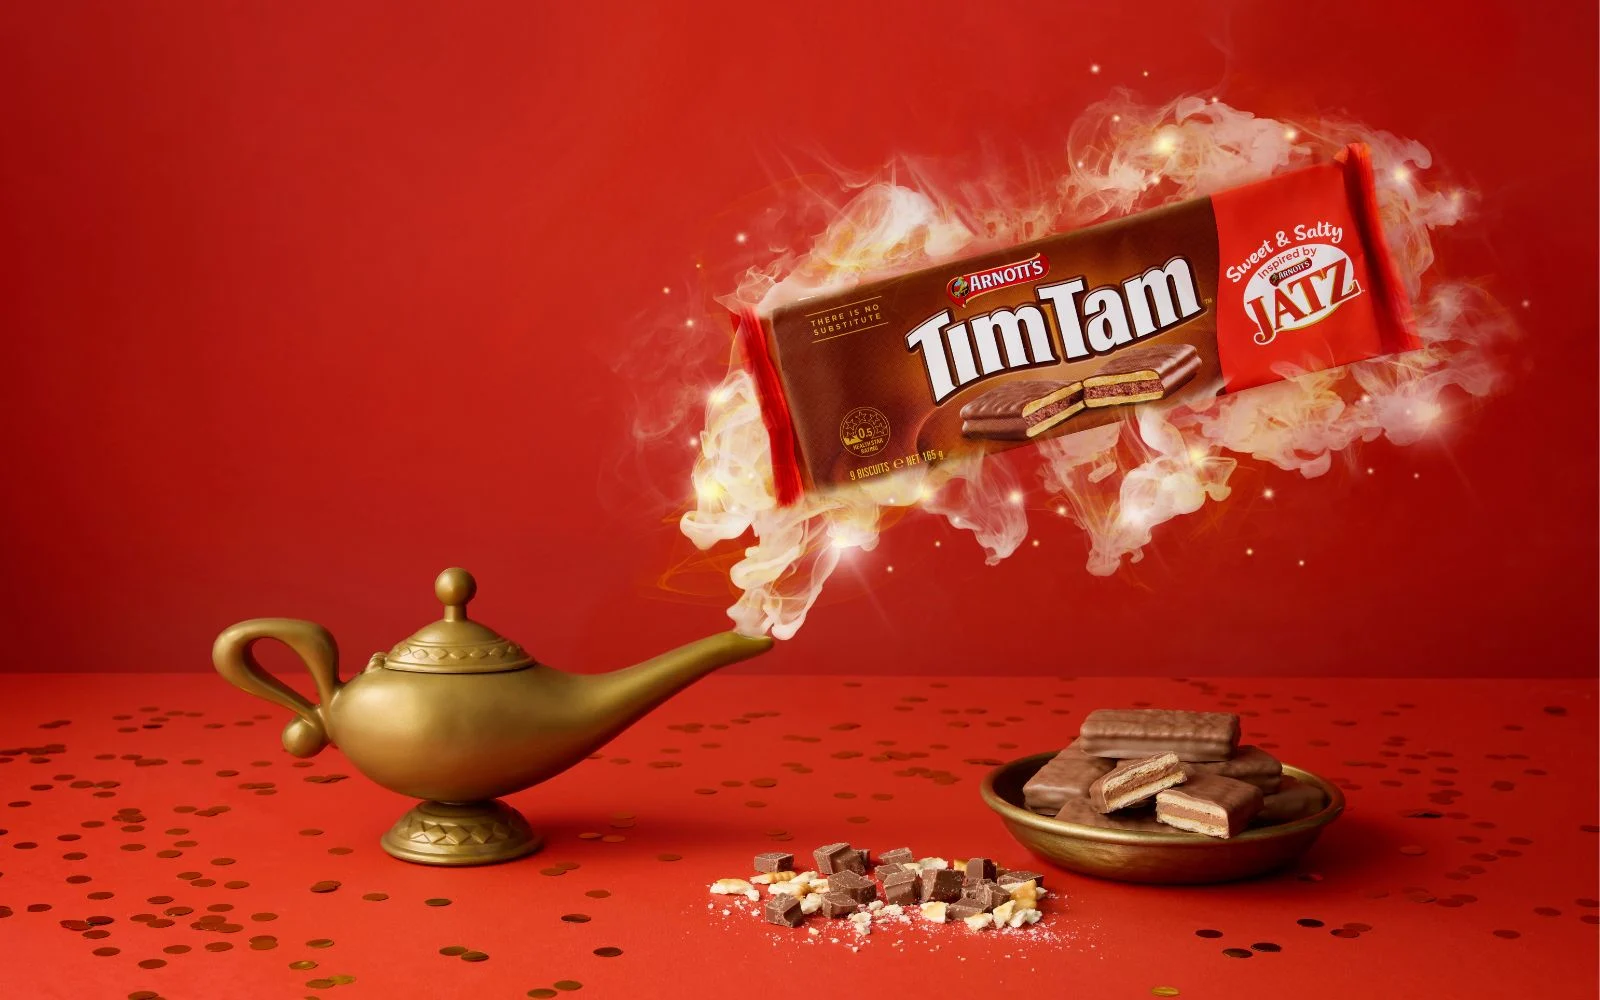 WHEN SWEET MET SALTY: AUSTRALIA ASKED AND TIM TAM DELIVERED 